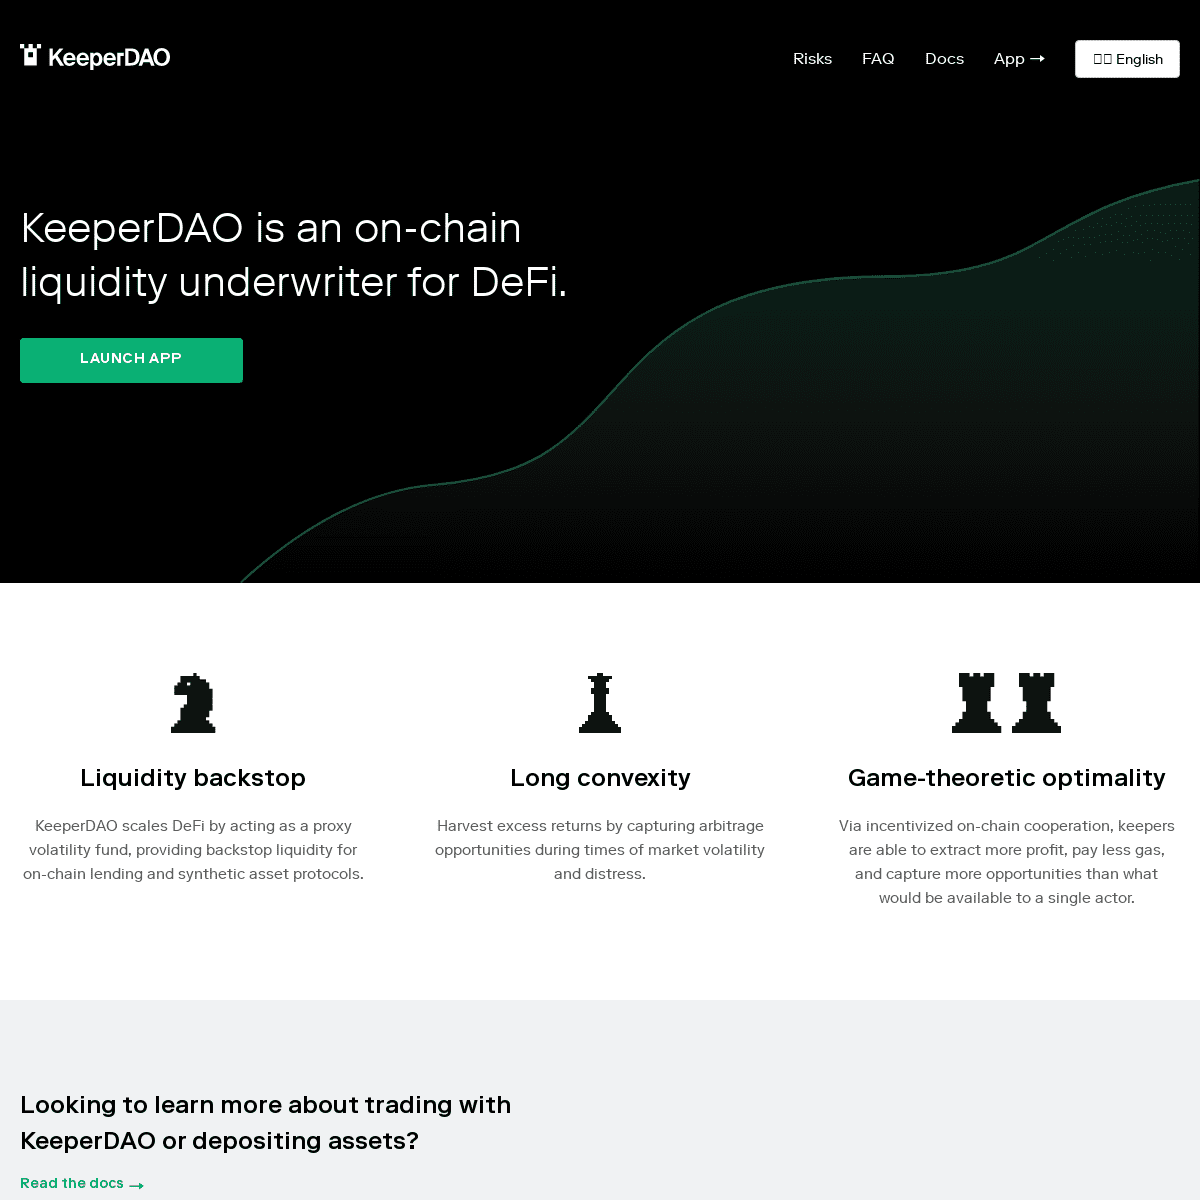 A complete backup of https://keeperdao.com